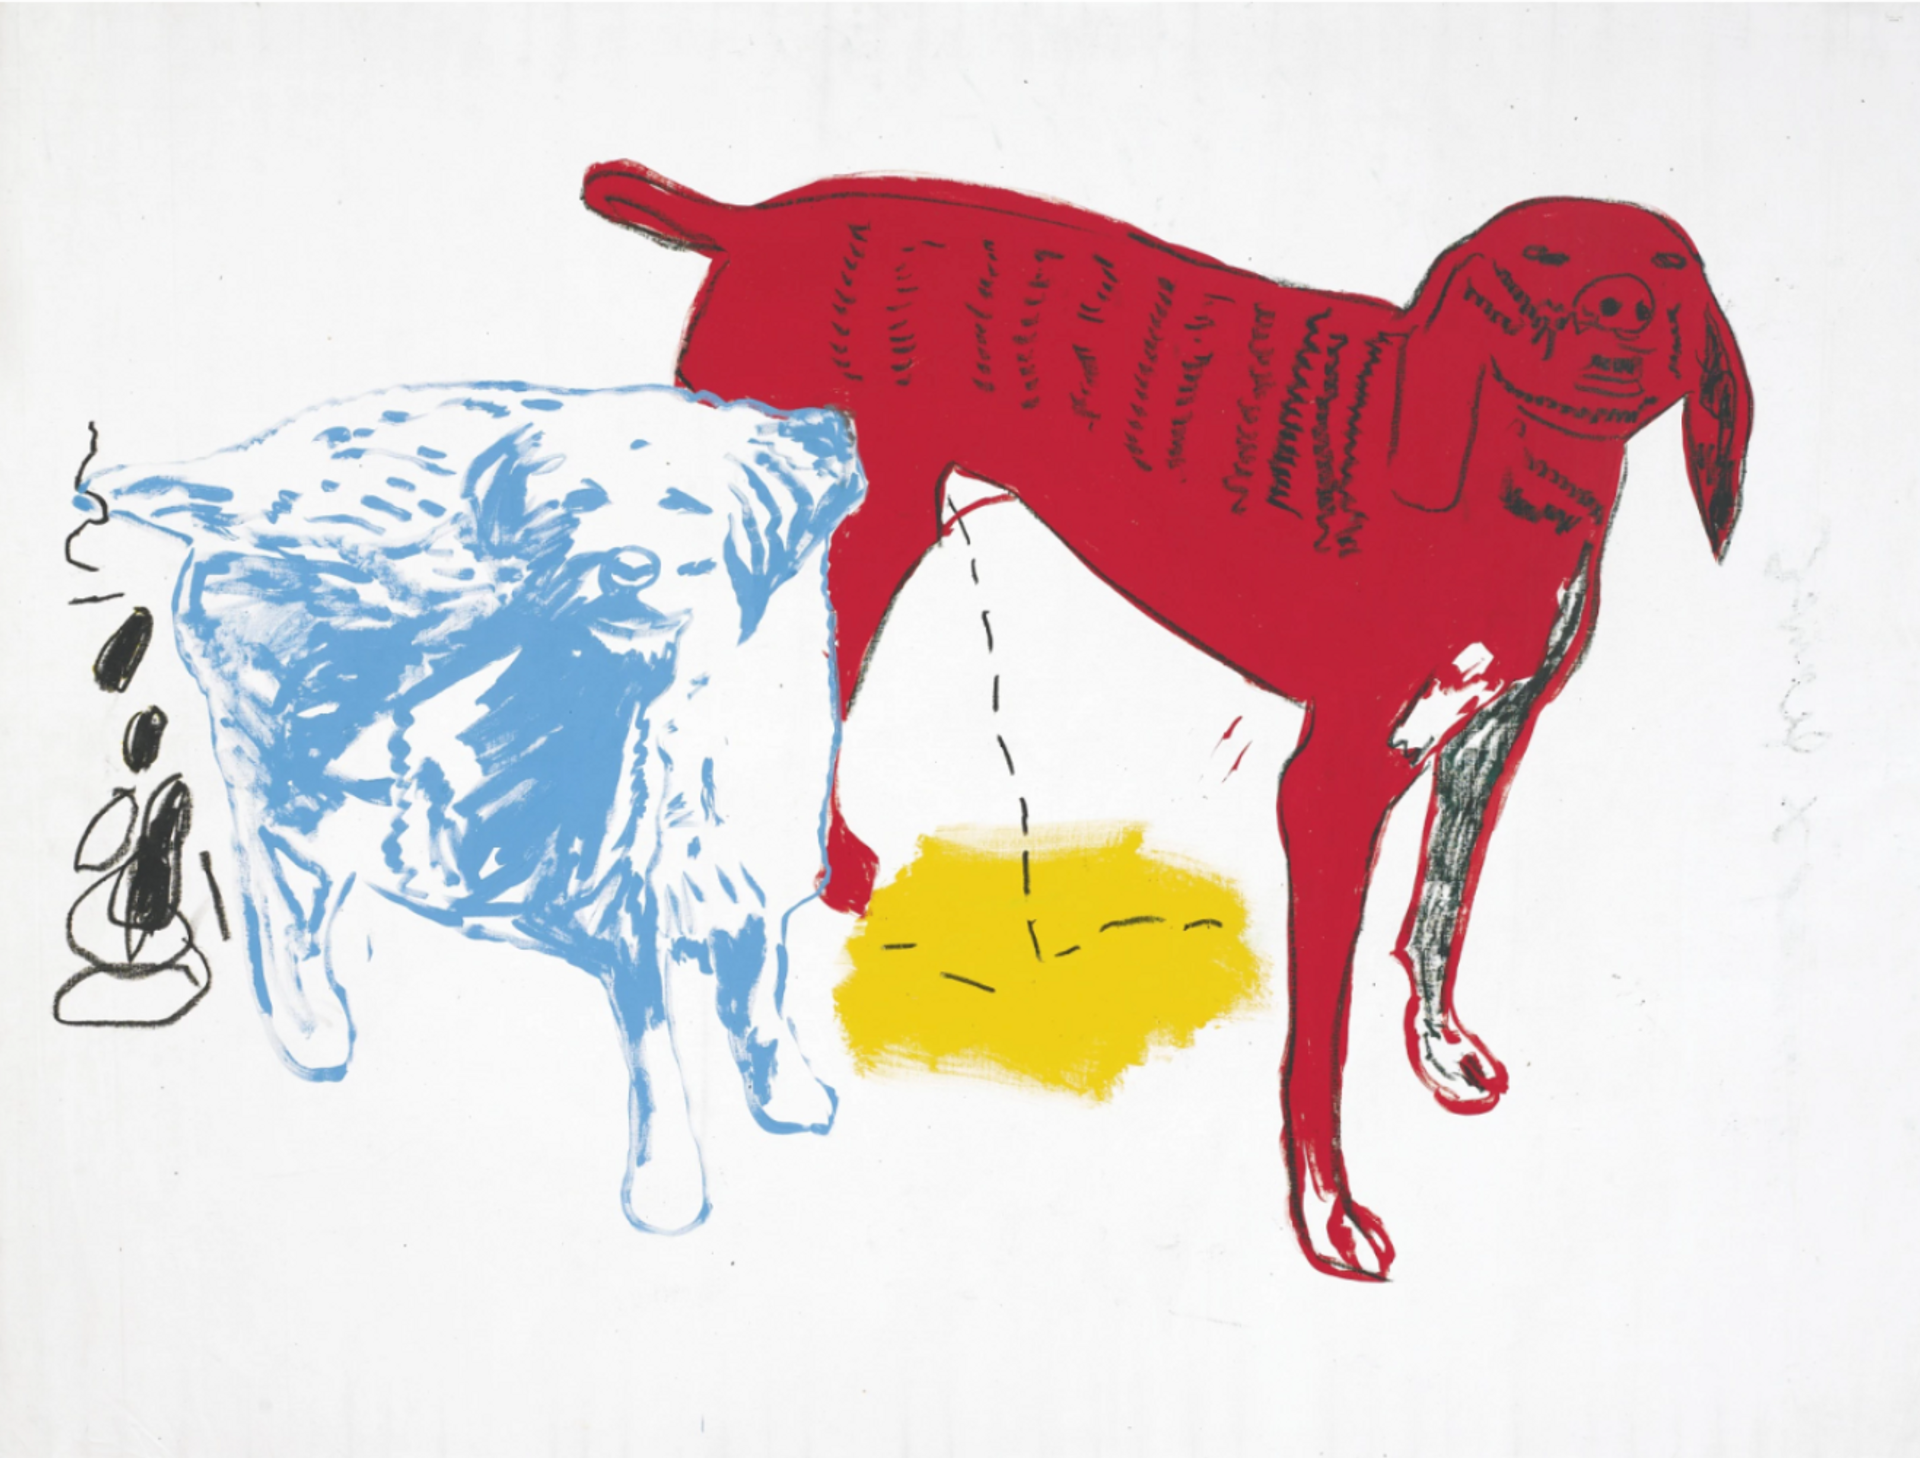 Untitled (two dogs) by Jean-Michel Basquiat and Andy Warhol